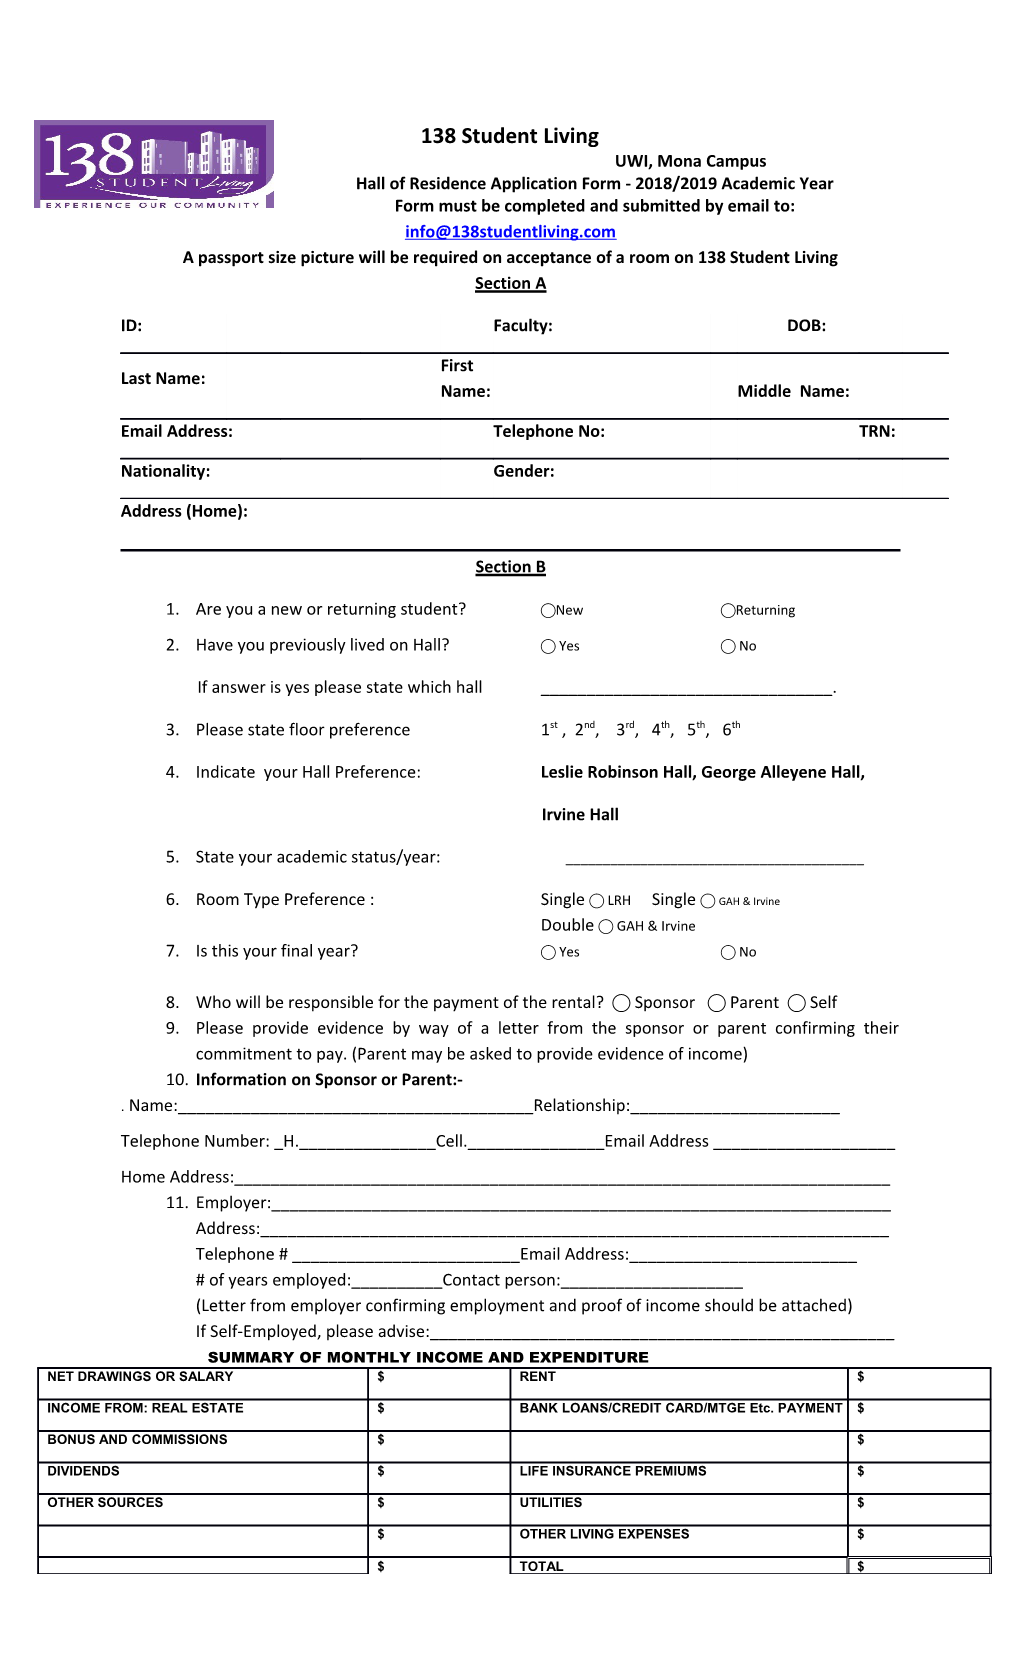 Hall of Residence Application Form - 2018/2019 Academic Year